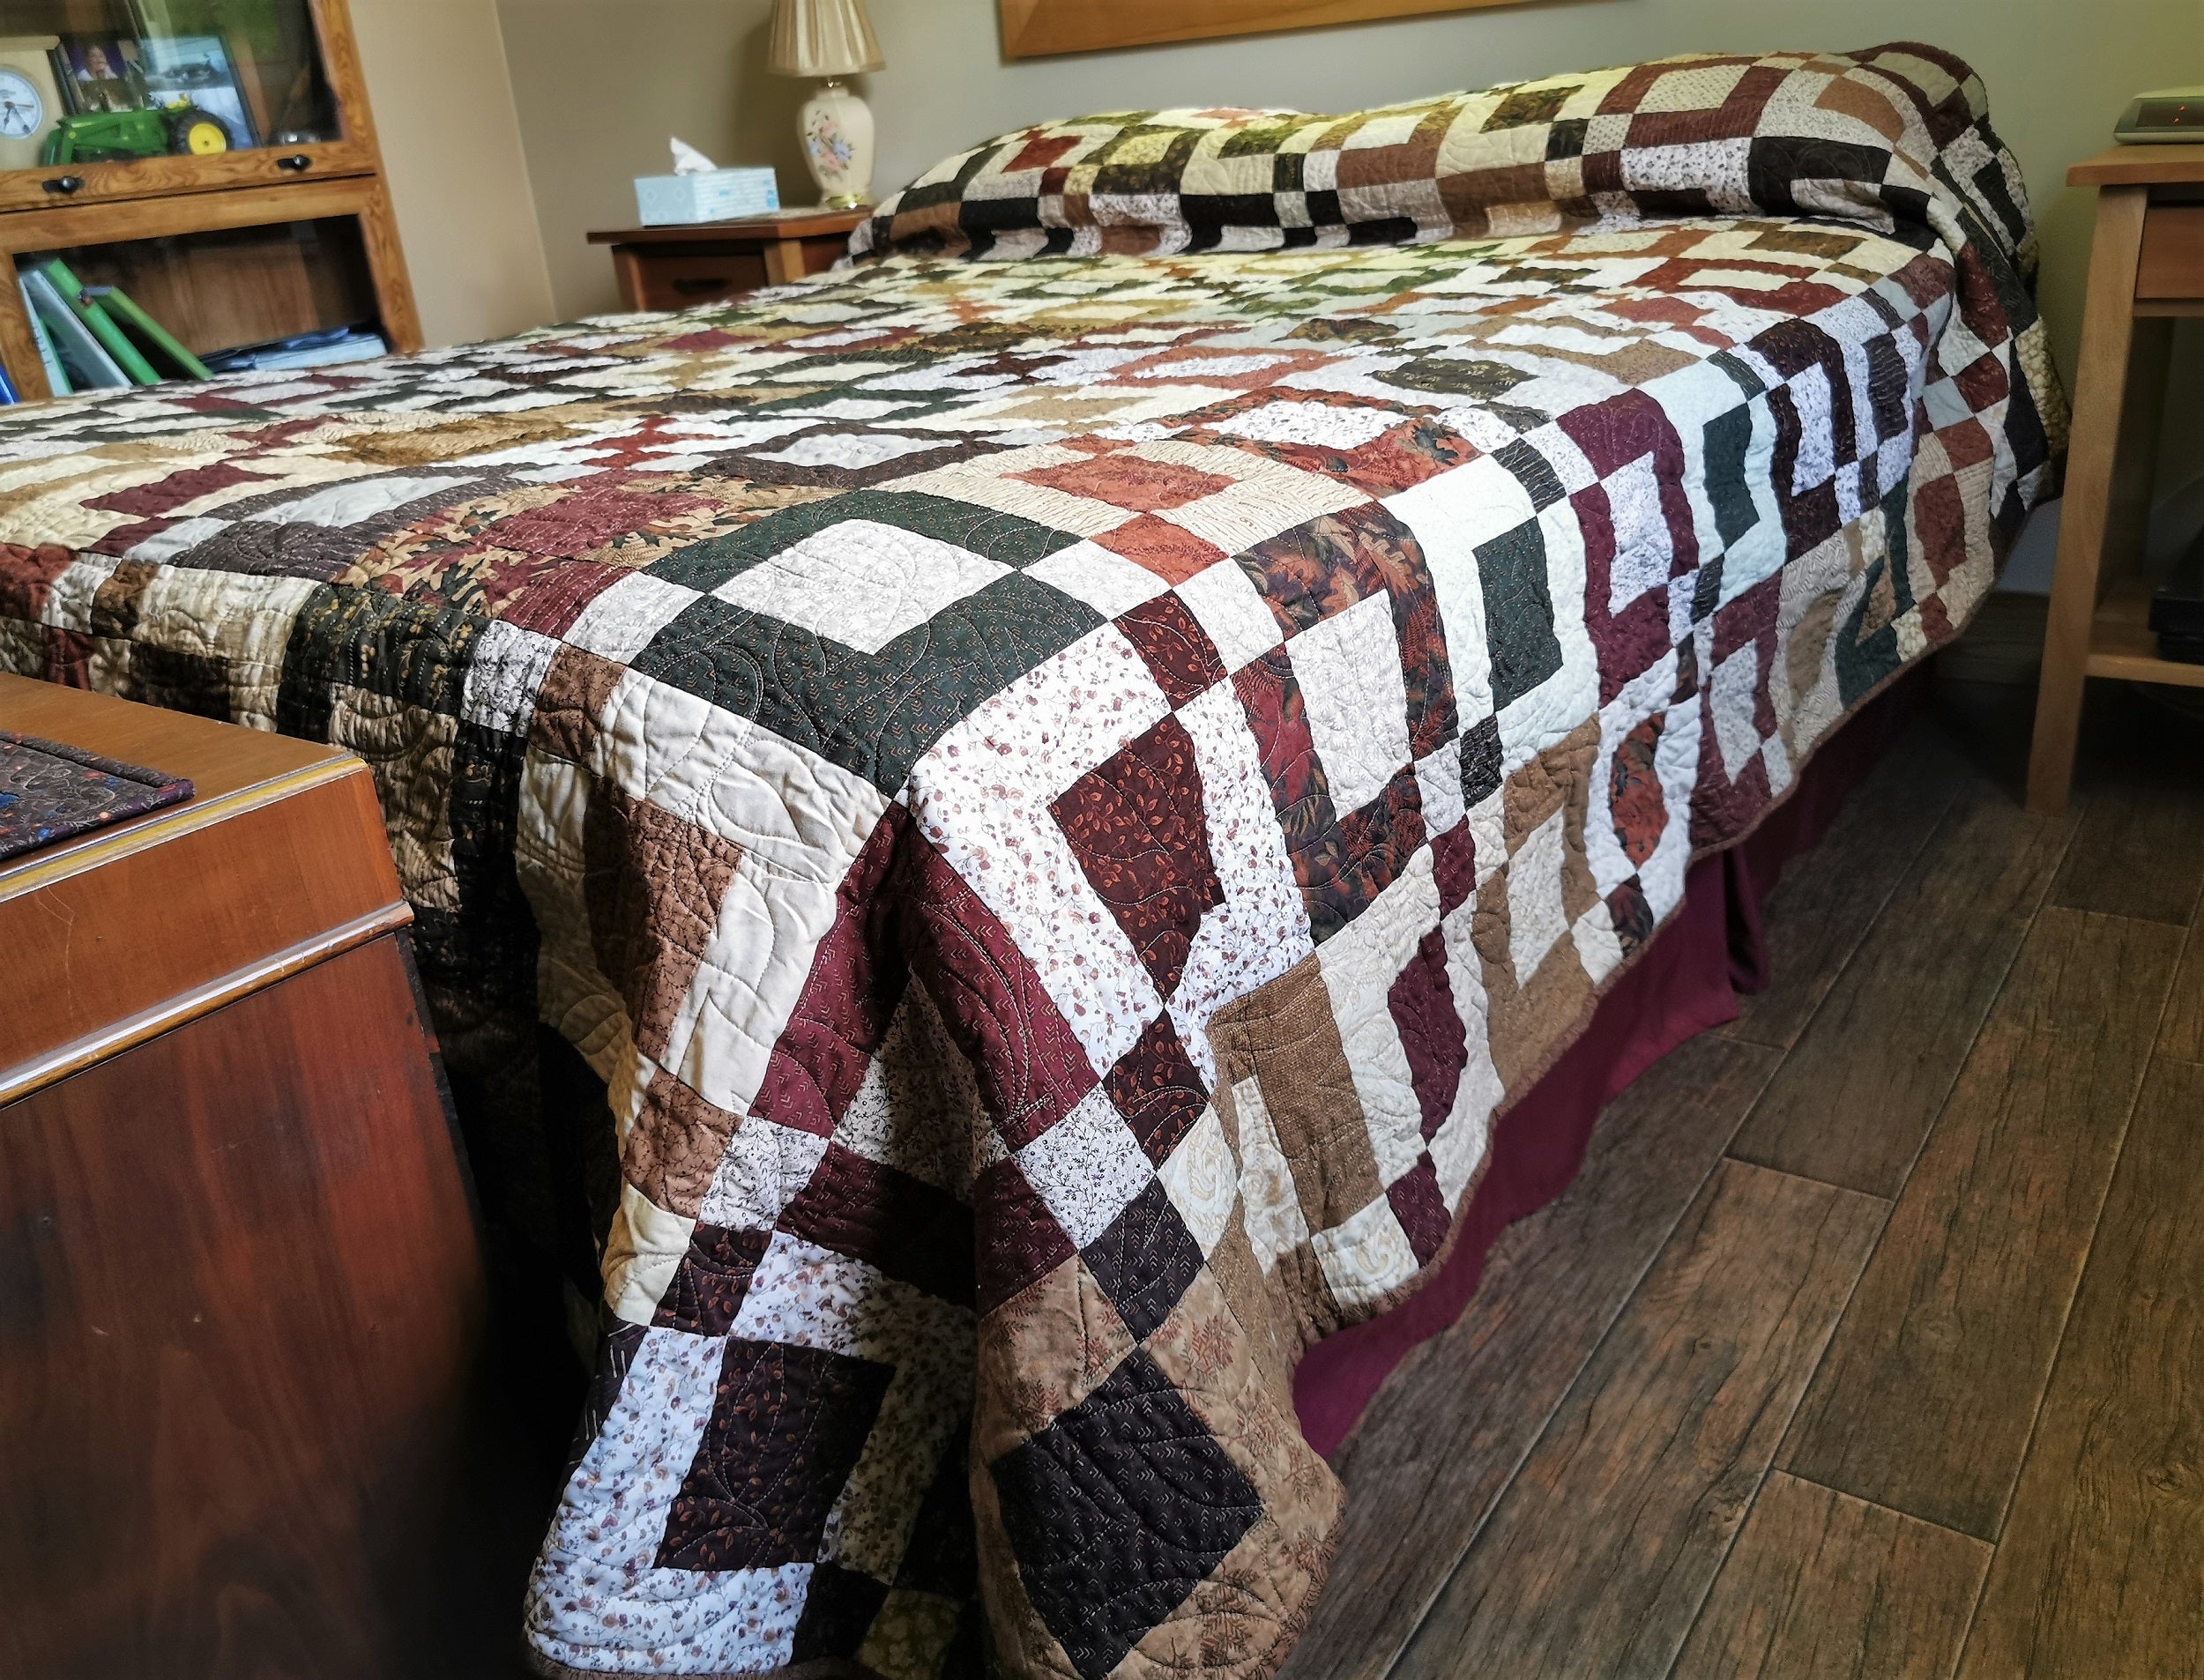 Quilt shown on queen bed, showing the drop on the sides and the quilt up over the pillows at the head of the bed.